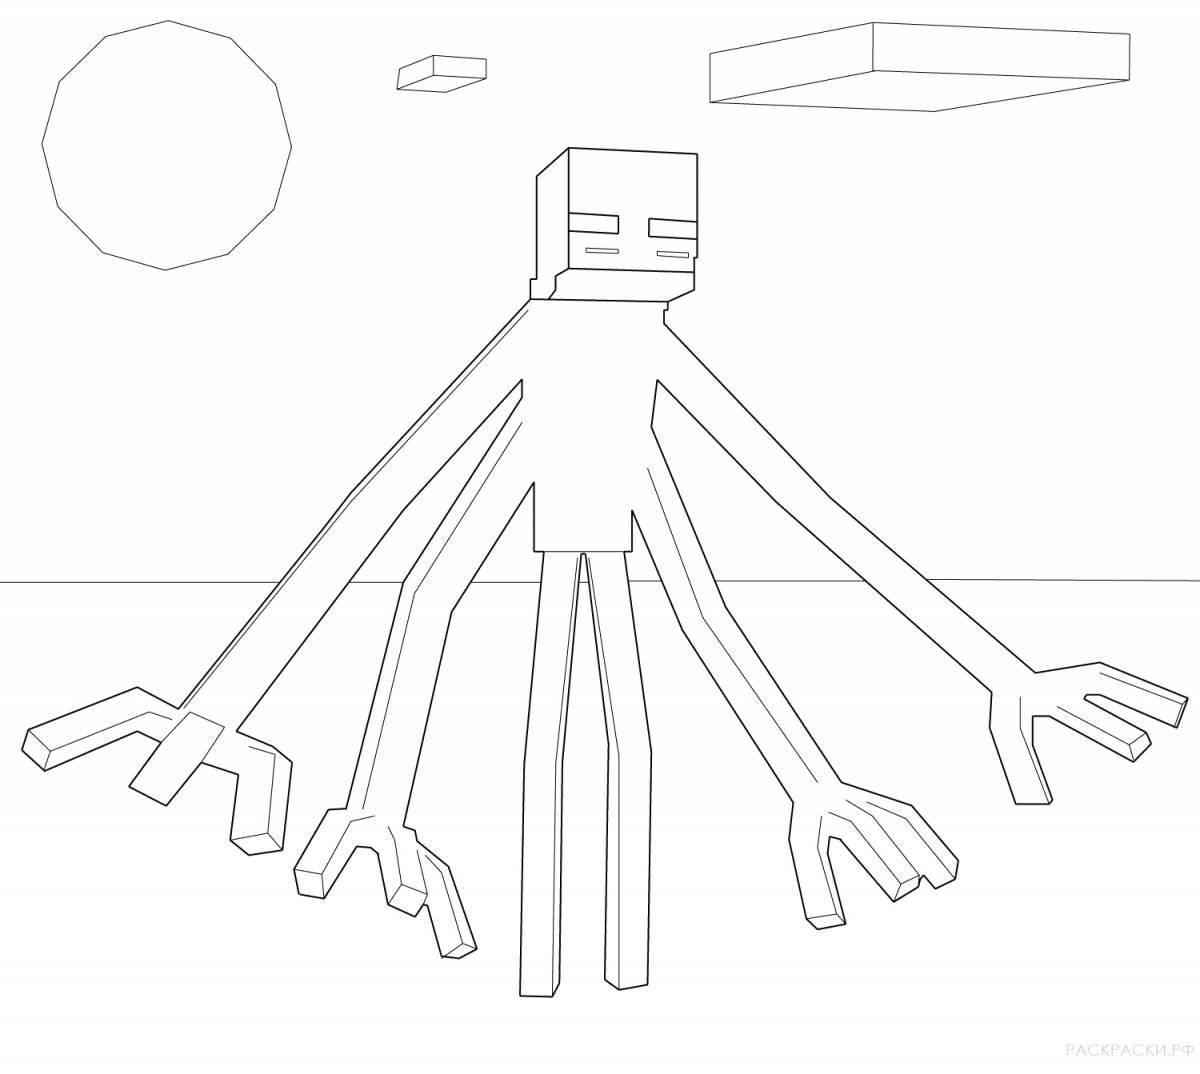 Ender world playful coloring page